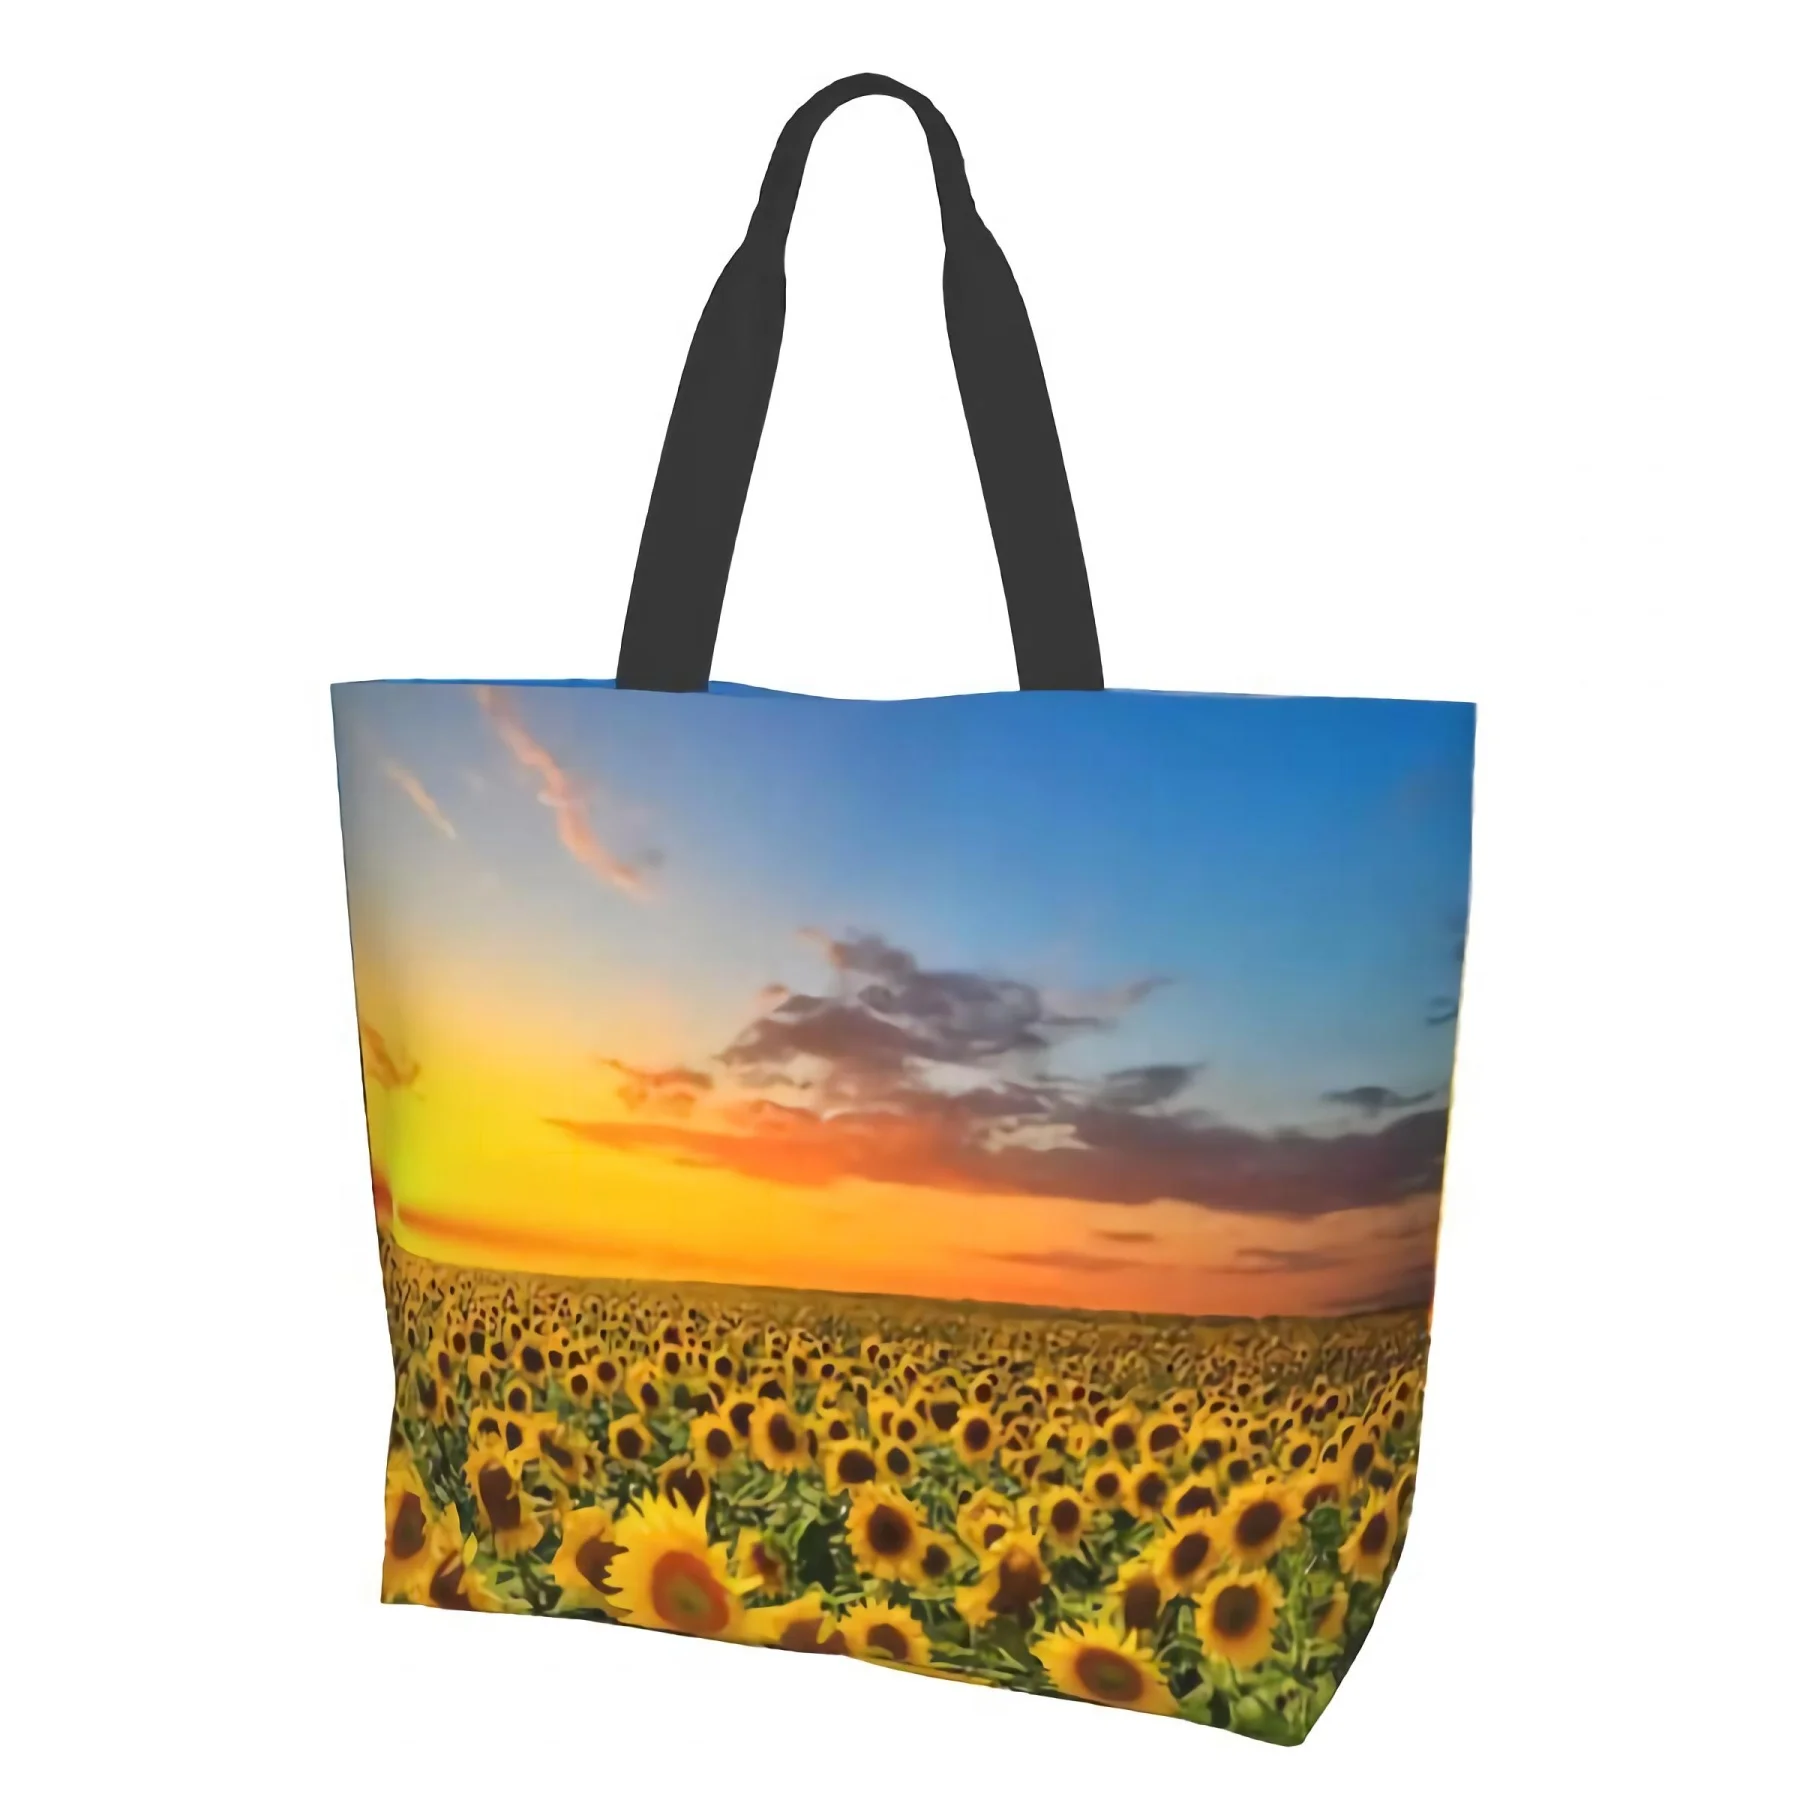 

Sunflowers Sunset Canvas Tote Bag for Women Weekend Kitchen Grocery Bags Bulk Large Casual Shopping Shoulder Handbag Storage